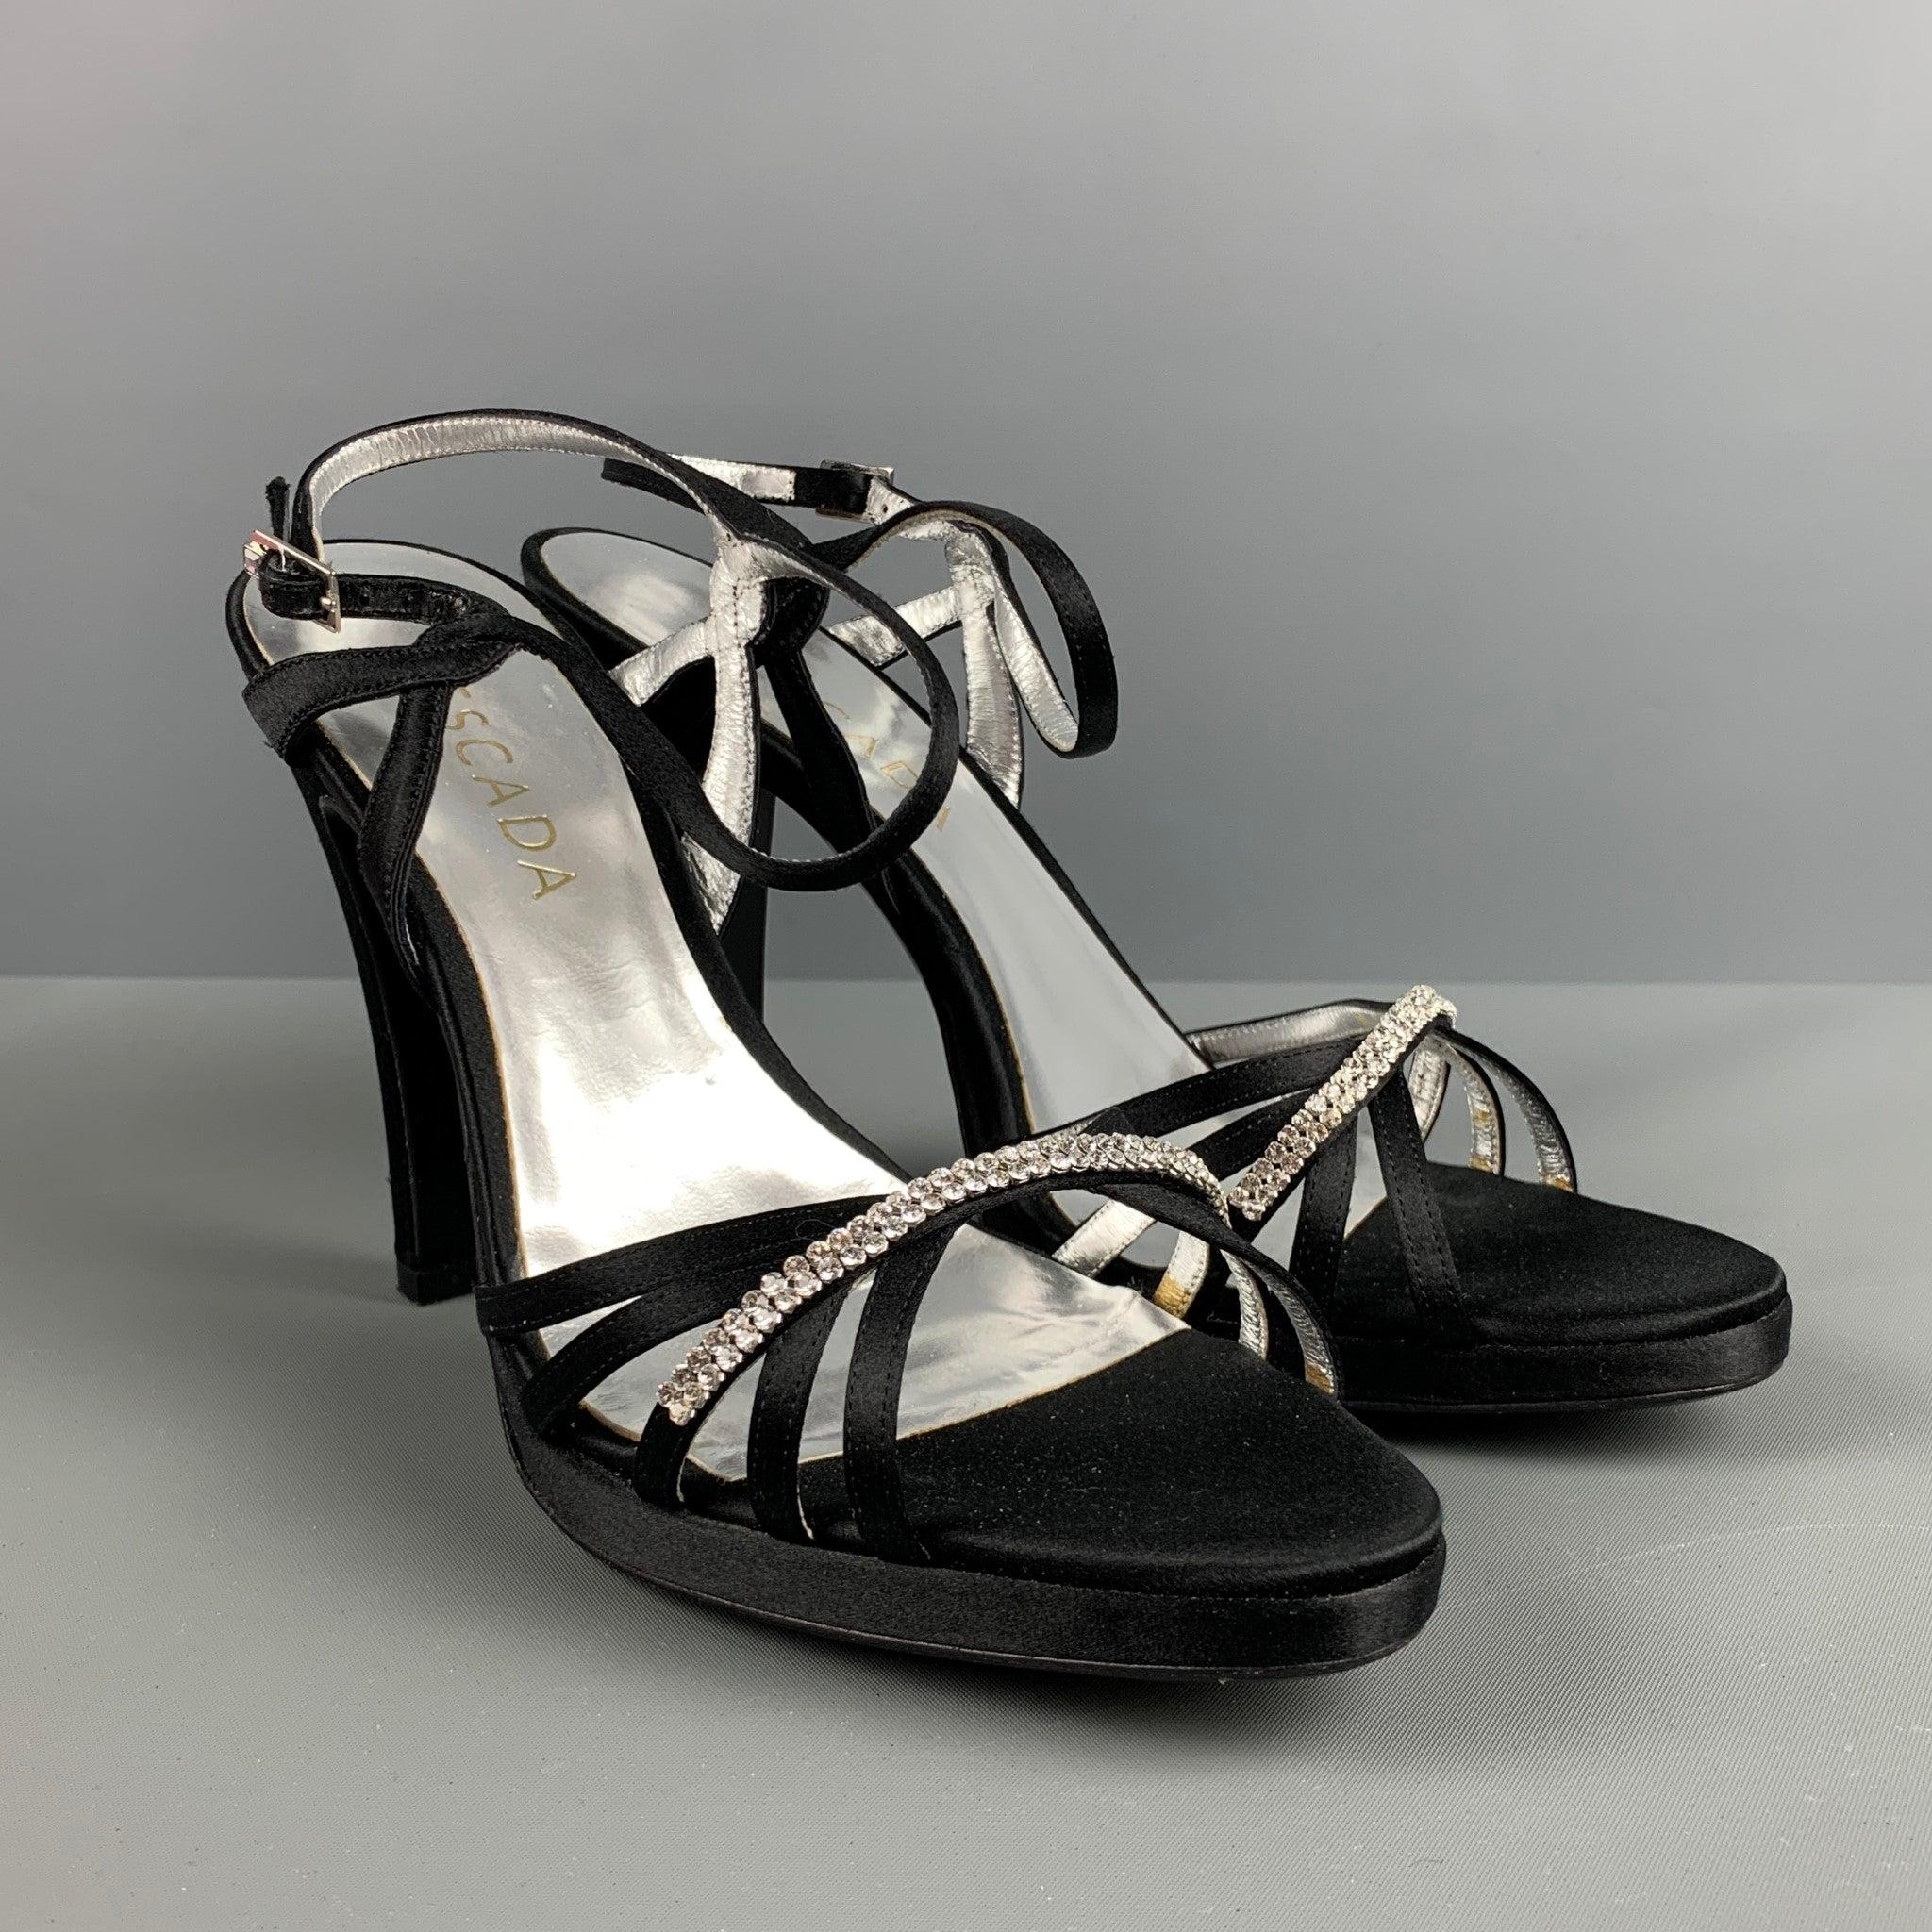 ESCADA sandals comes in a black silk material featuring an ankle strap, and silver rhinestones detail. Comes with the box and dust bag. Made in Italy.Very Good Pre-Owned Condition. Minor signs of wear. 

Marked:   39 

Measurements: 
  Heel: 4.5